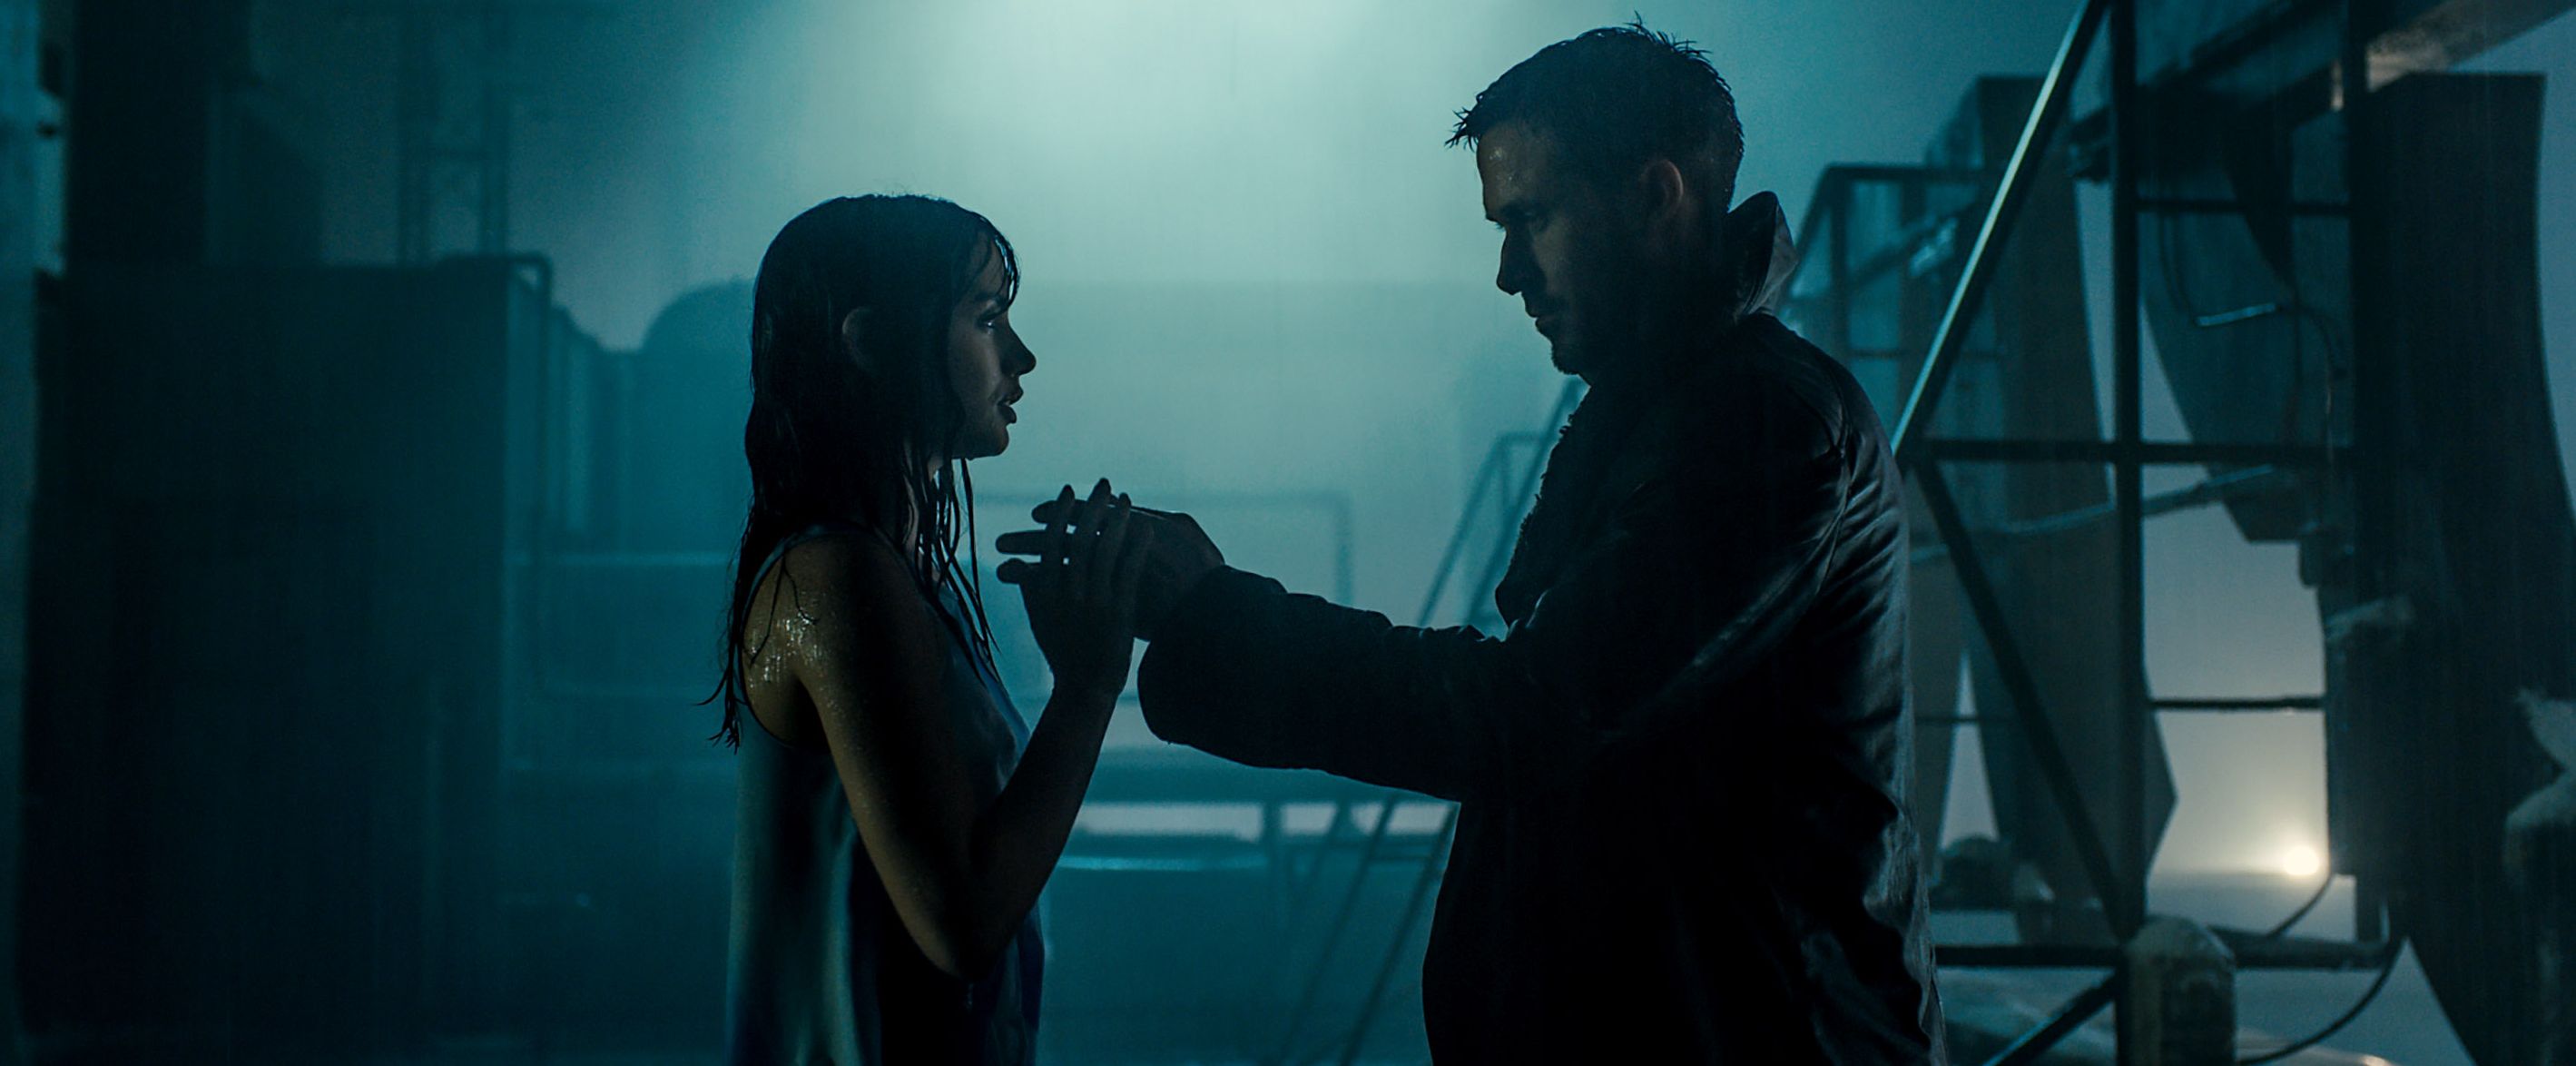 All the right feels - 'Blade Runner 2049' (Ana De Armas and 